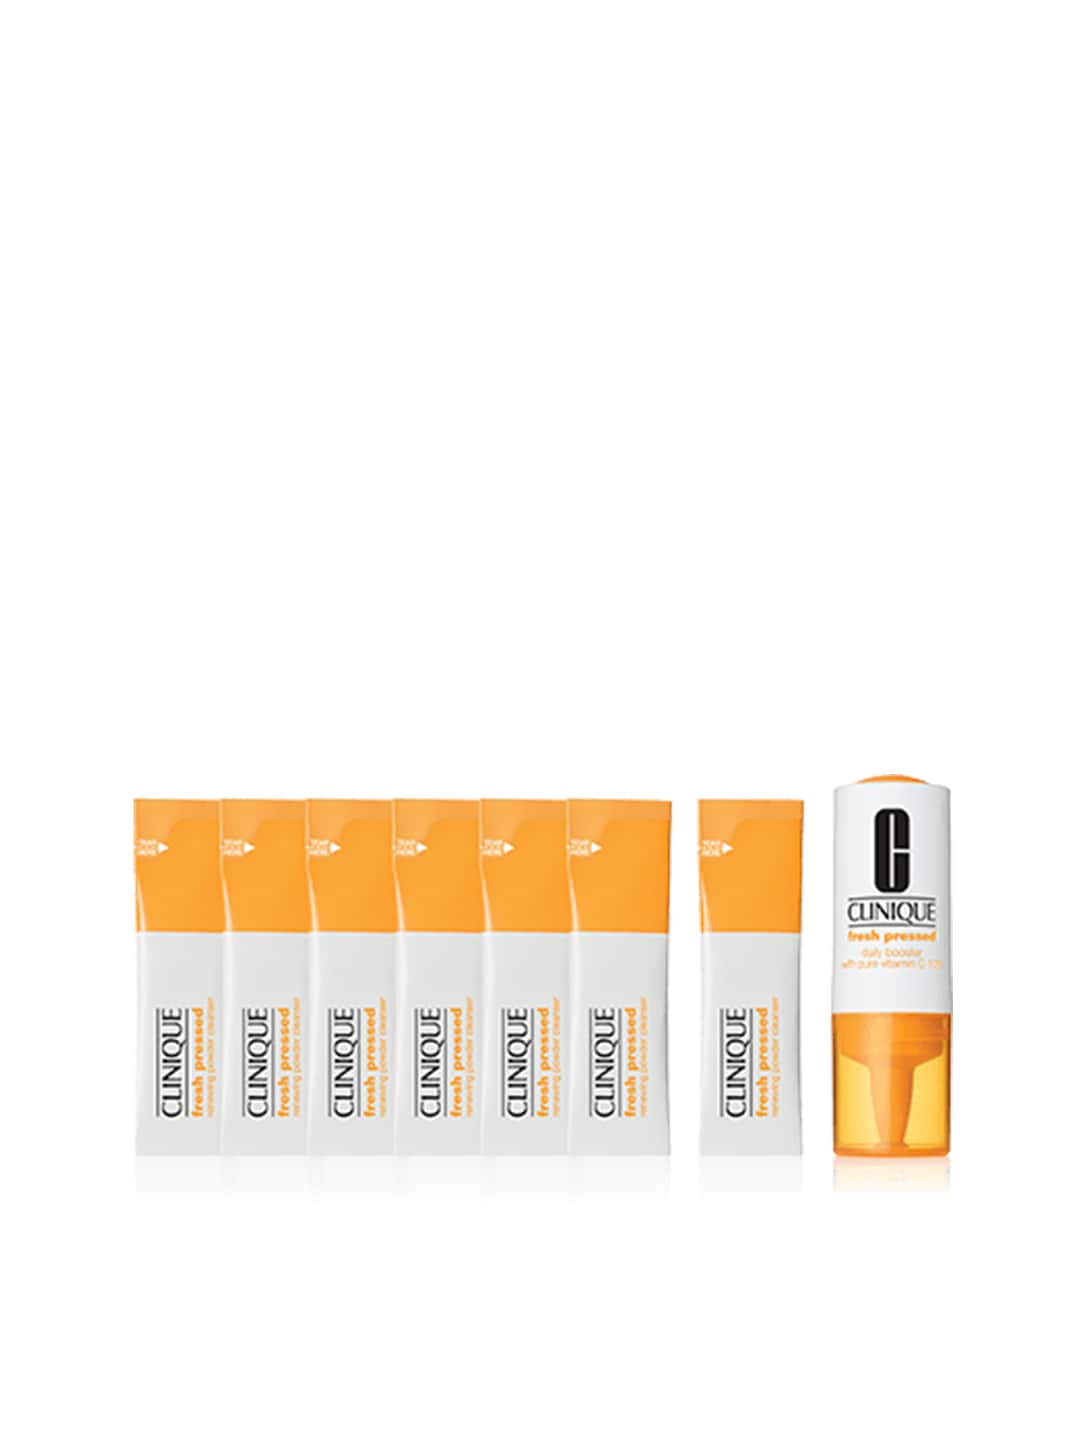 Clinique Fresh Pressed 7-Day System with Pure Vitamin C 5g (each) + 8.5ml Price in India